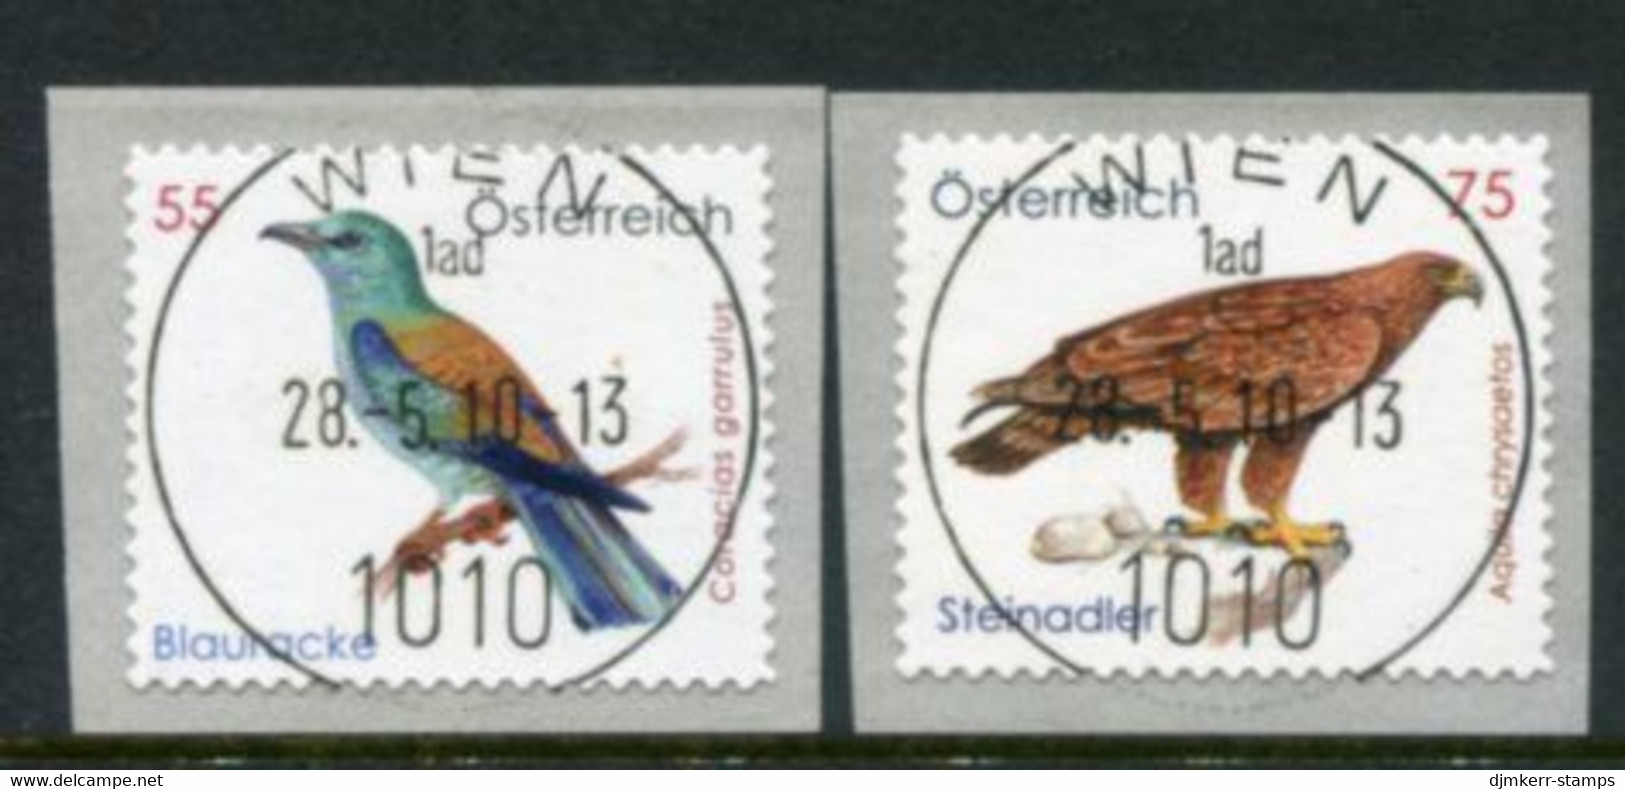 AUSTRIA  2010 Fauna Self-adhesive Definitives Used  .  Michel 2871-72 - Used Stamps